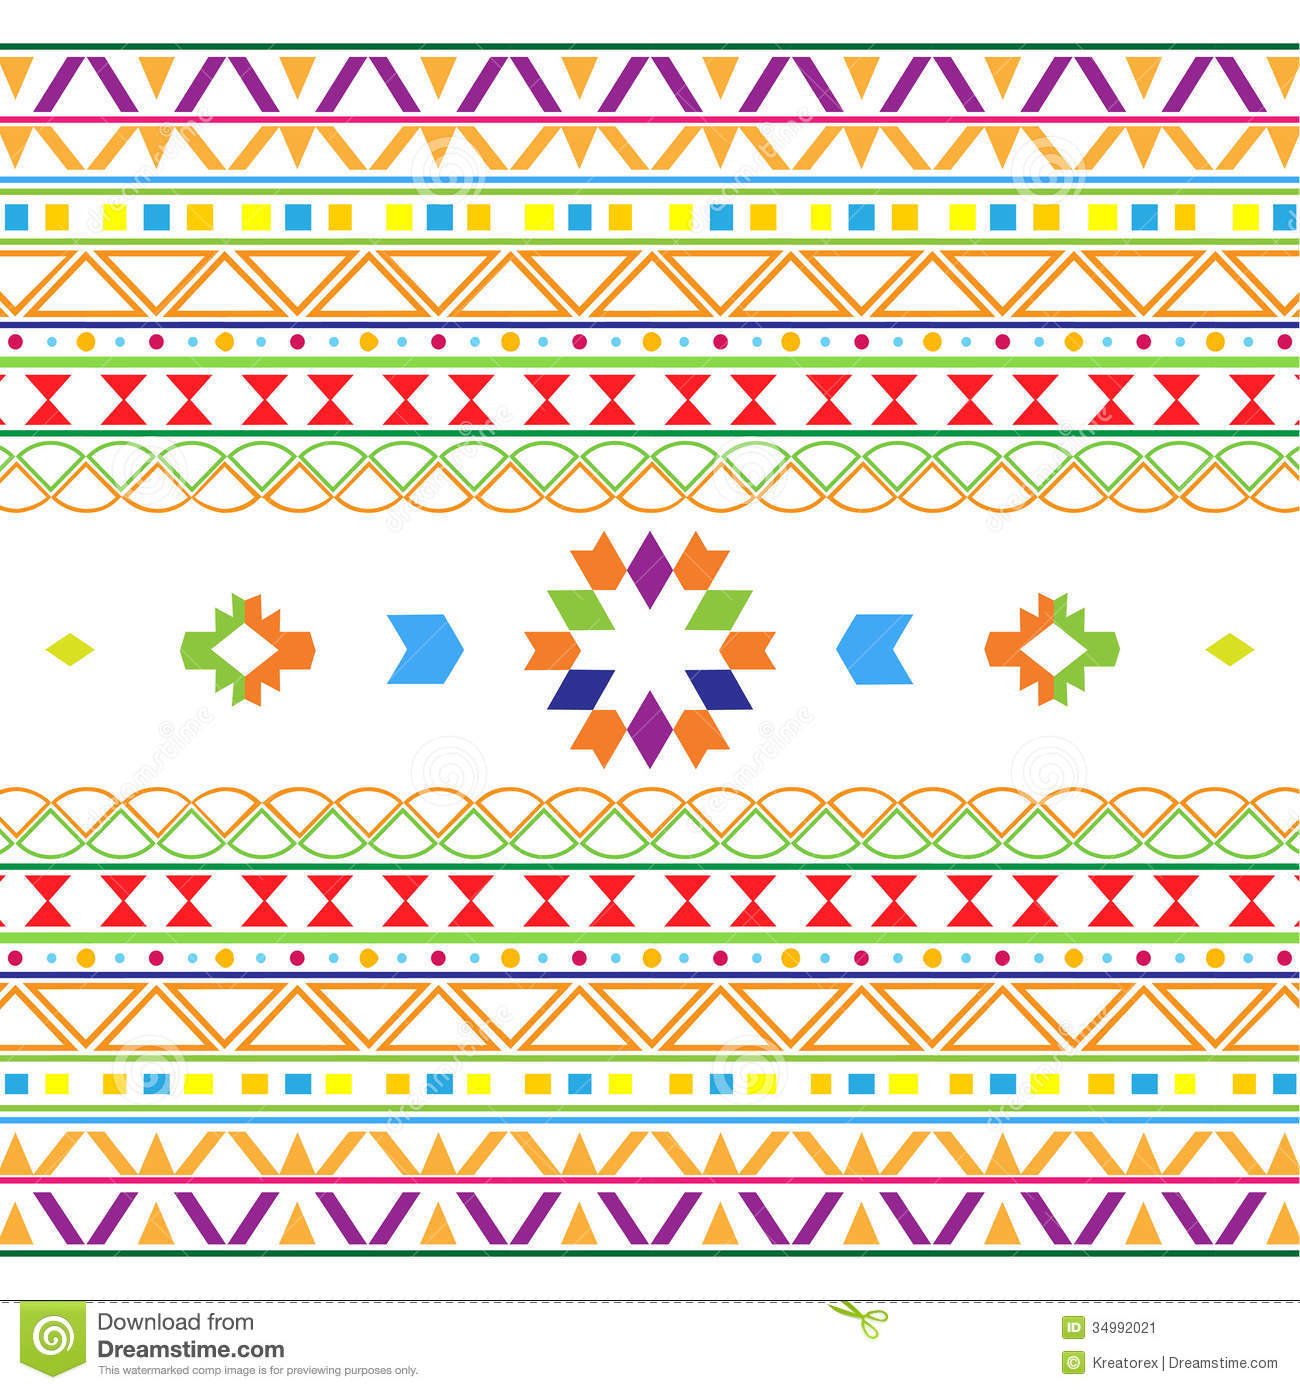 Mexican Patterns Backgrounds Aztec pattern